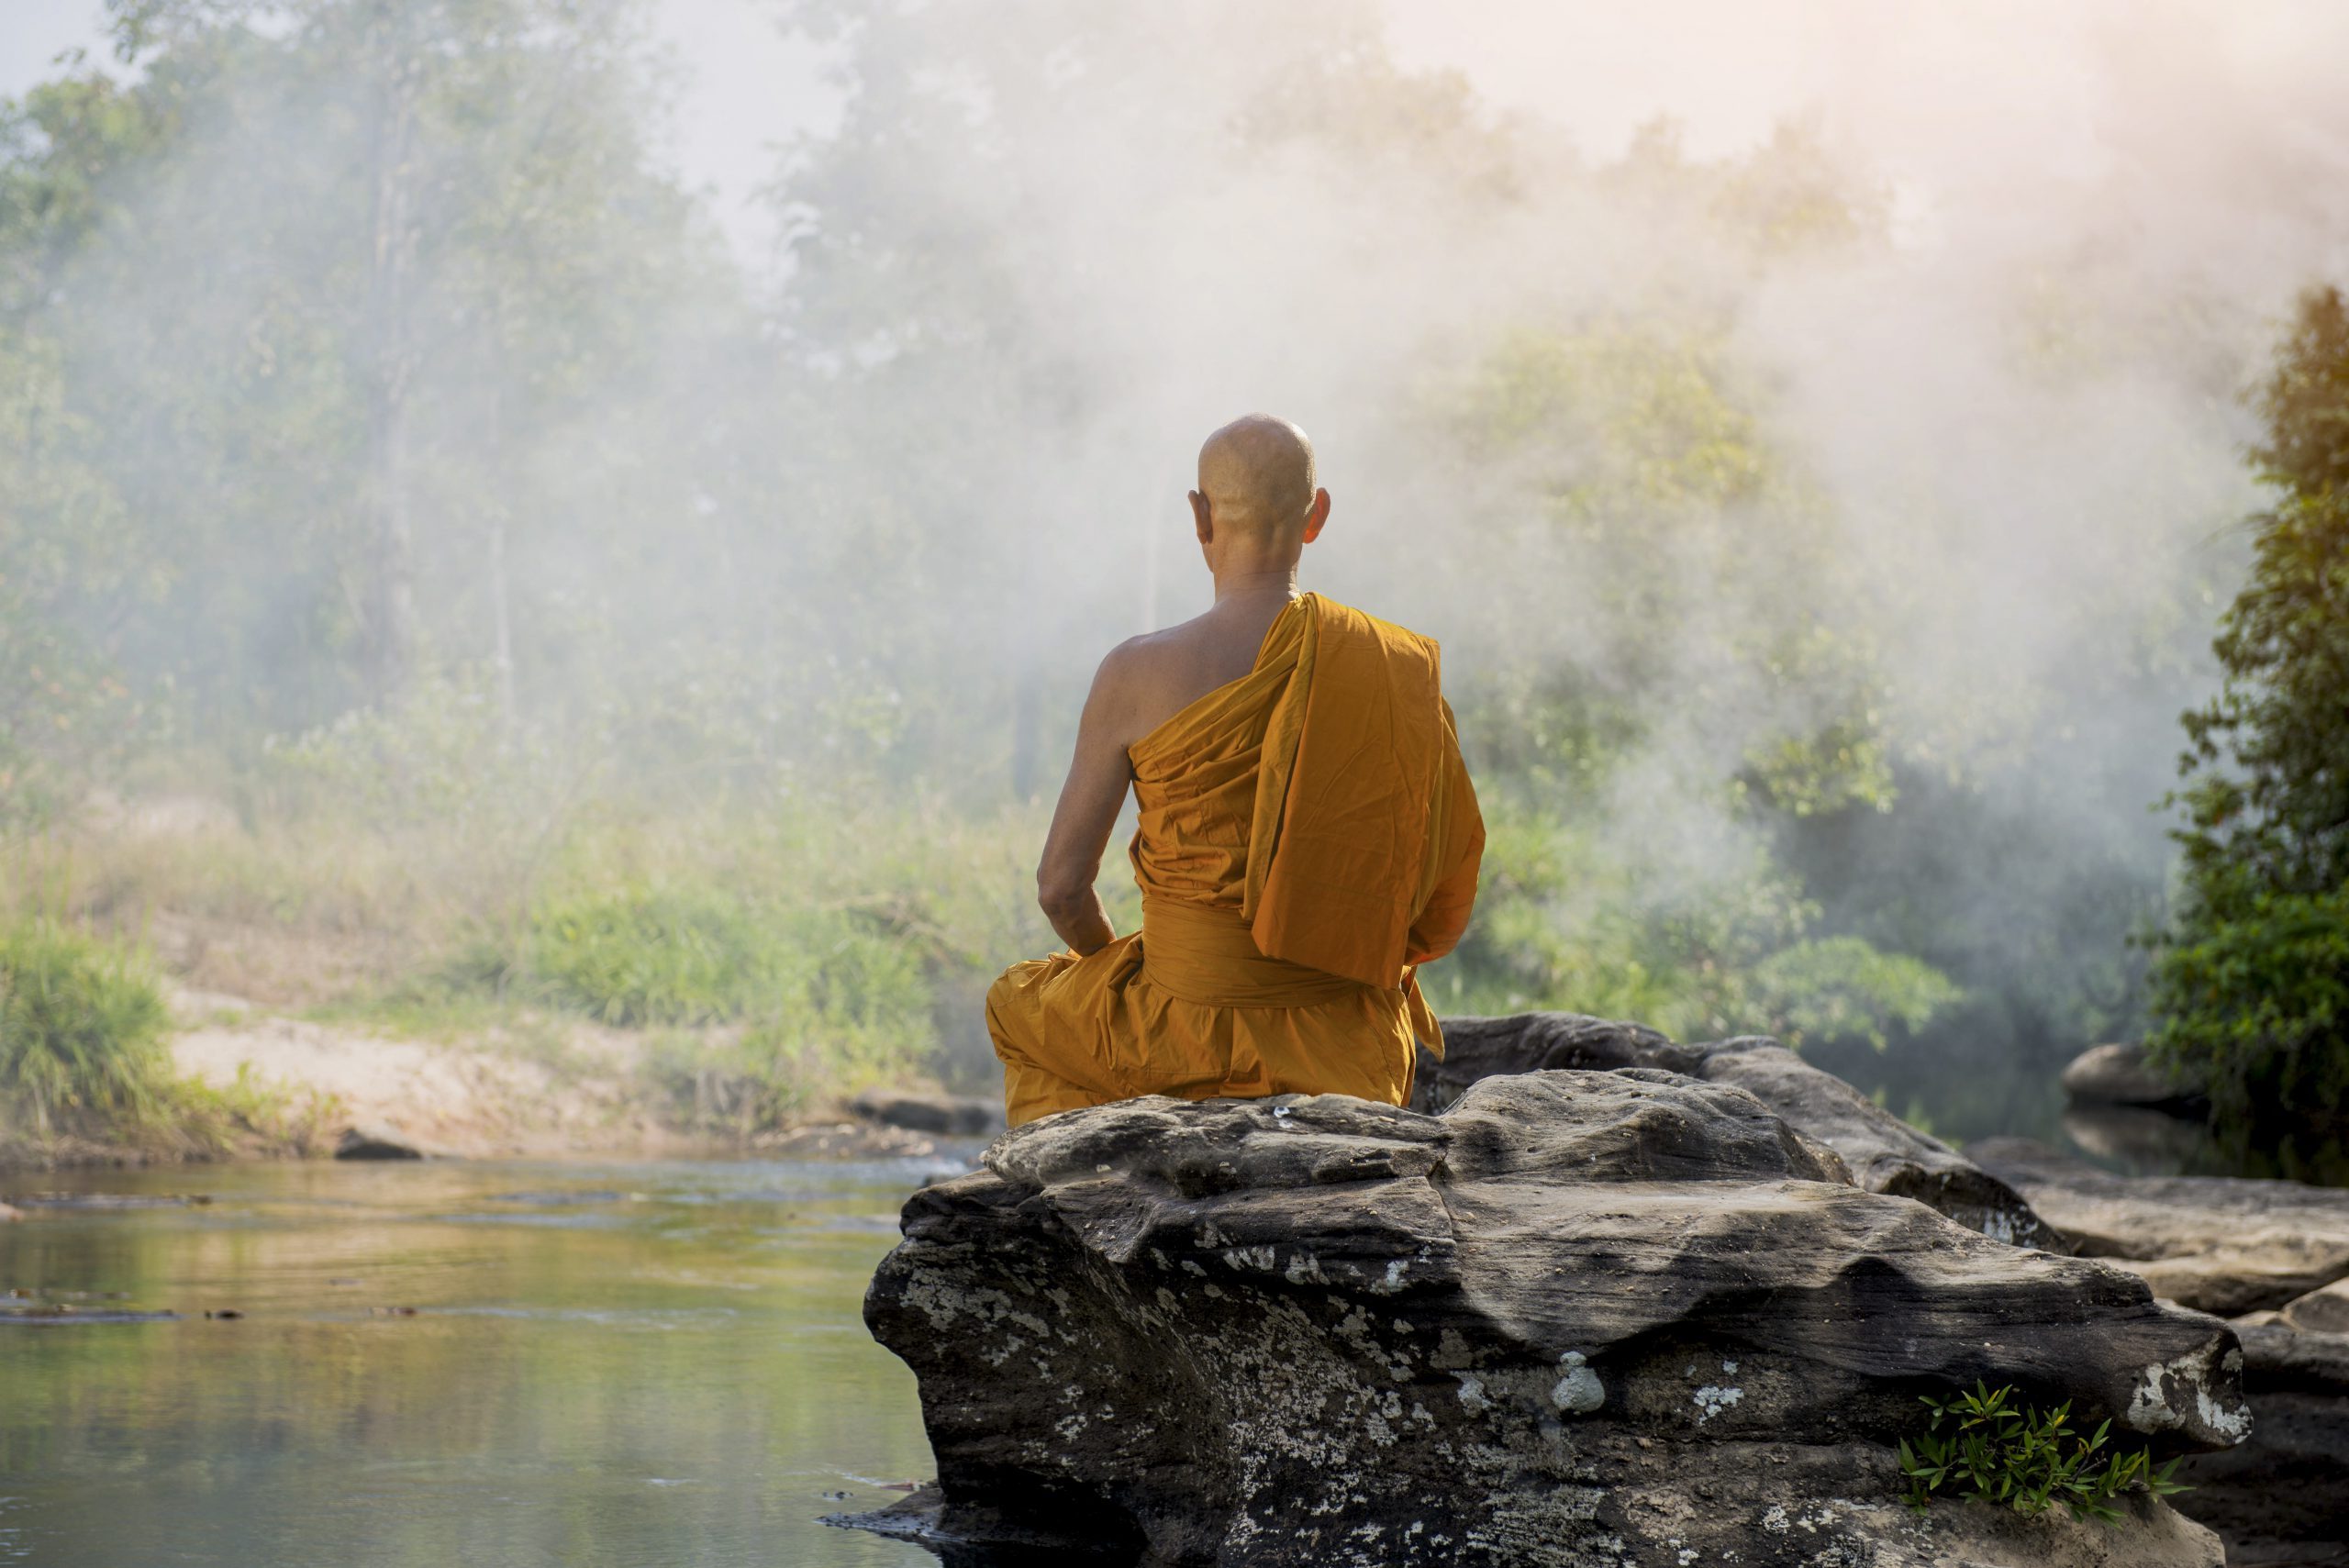 Wise Meditation – How Mindfulness Can Make You More Wise